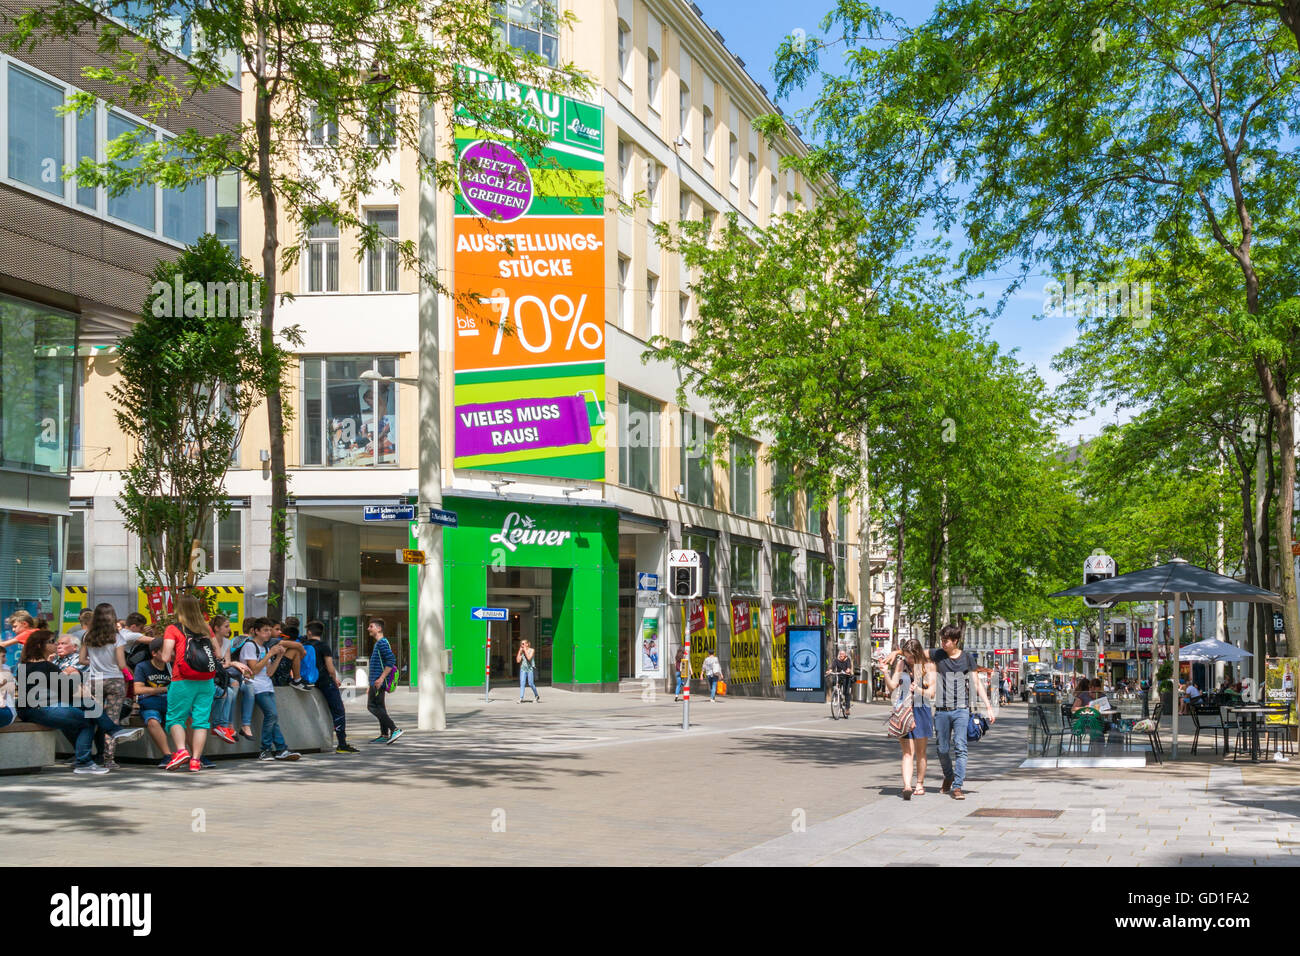 Leiner shop and people in shopping street Mariahilfer Strasse in Vienna, Austria Stock Photo